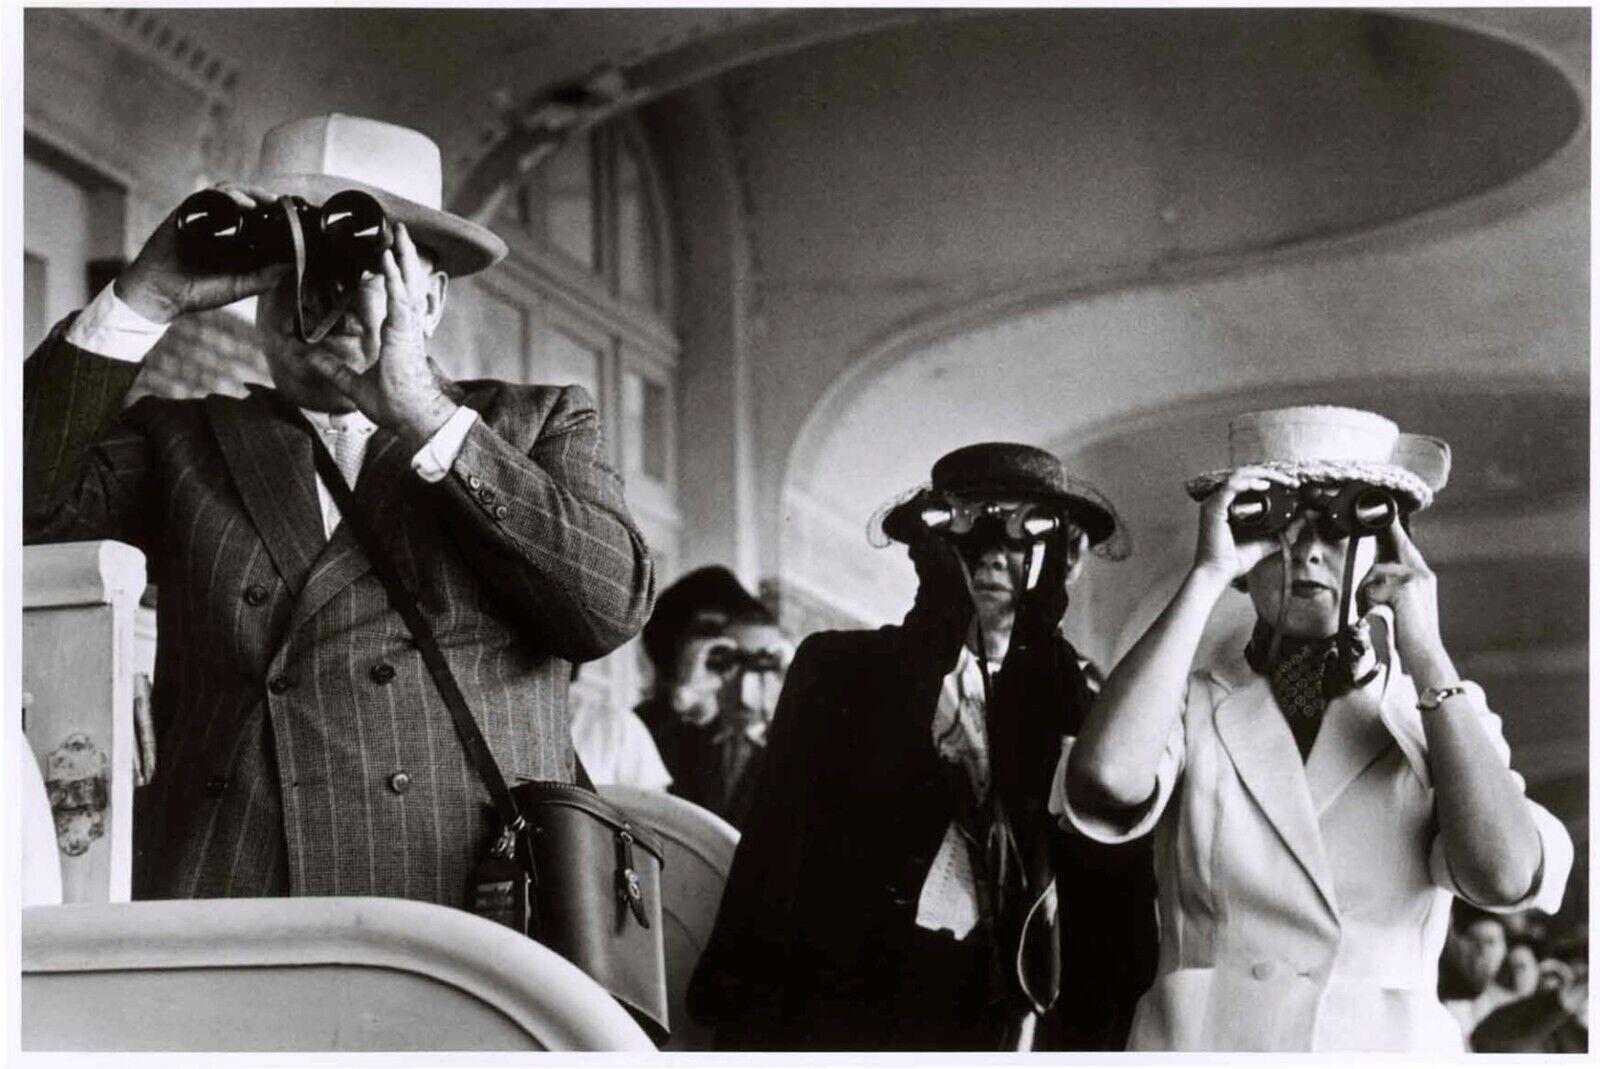 Robert Capa Black and White Photograph – Watching the horse races with binoculars, Deauville, Frankreich